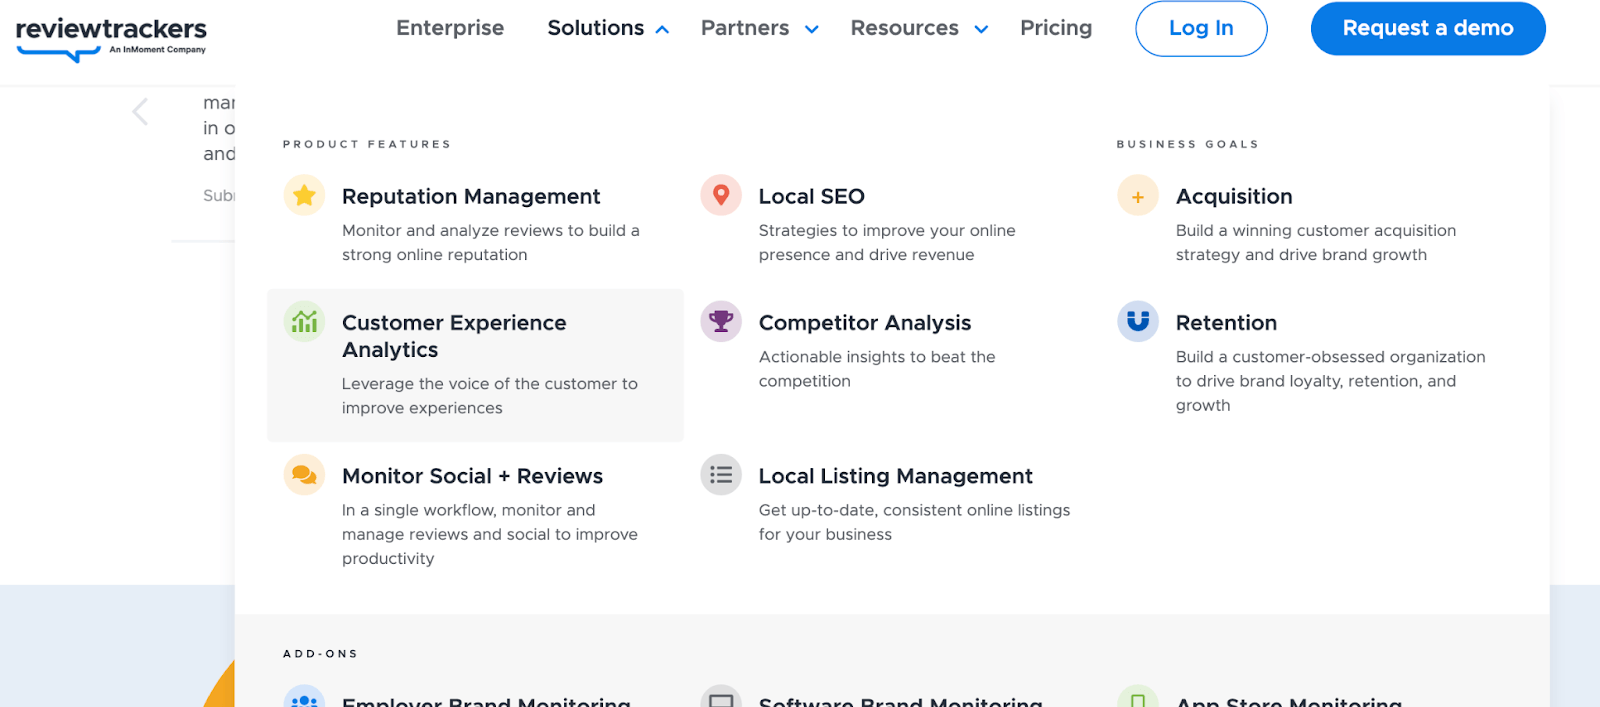 The pulldown menu for ReviewTracker's 'Solutions' tab on it's homepage. Solutions vary from 'Reputation Management' to 'Local Listing Management', all clickable and with brief subheadings.